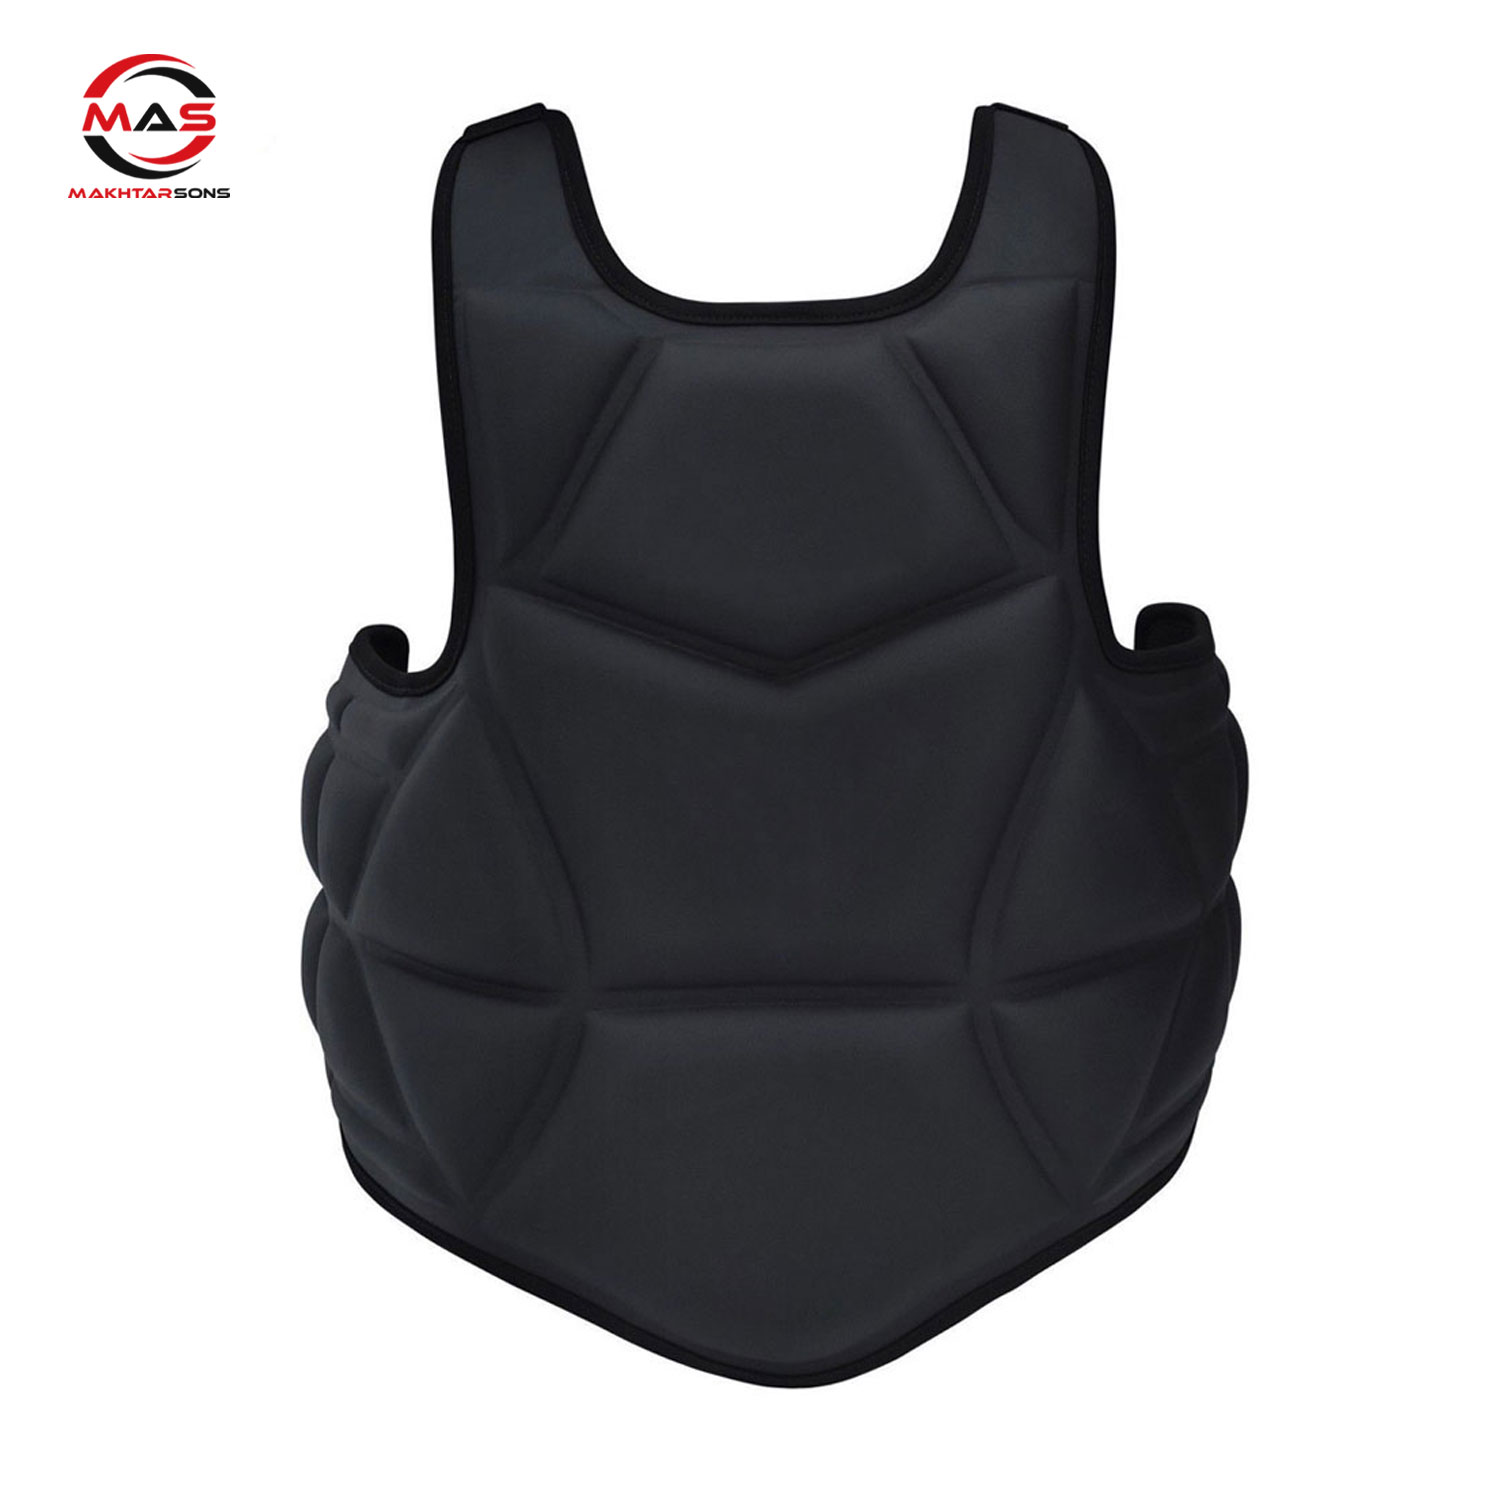 BODY CHEST PROTECTOR | MAS 280